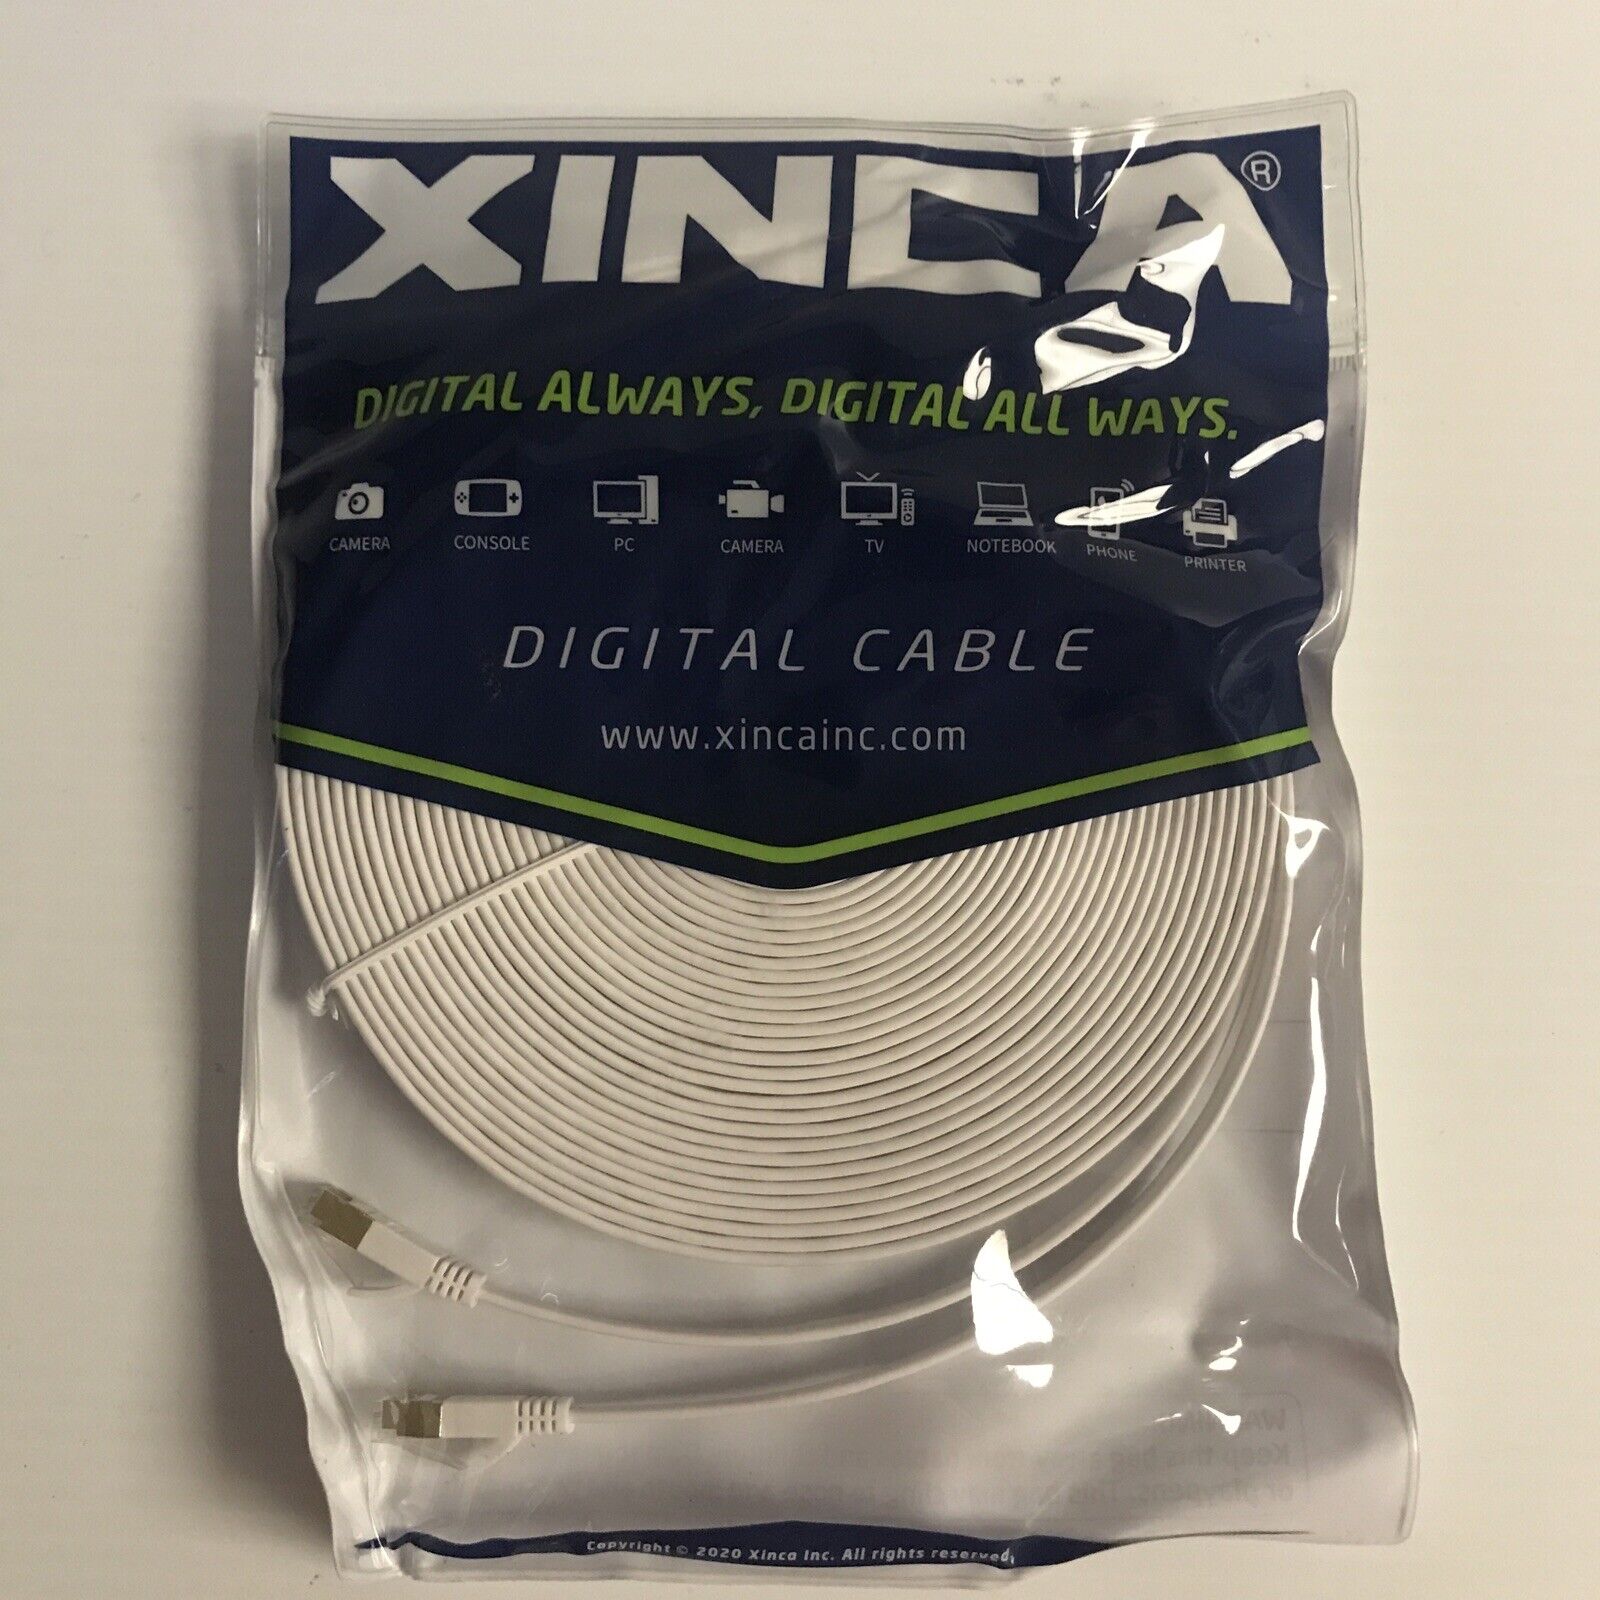 XINCA Cat 7 High Speed Flat Ethernet Cable 75ft - White NWOT Sealed Digital Cabl